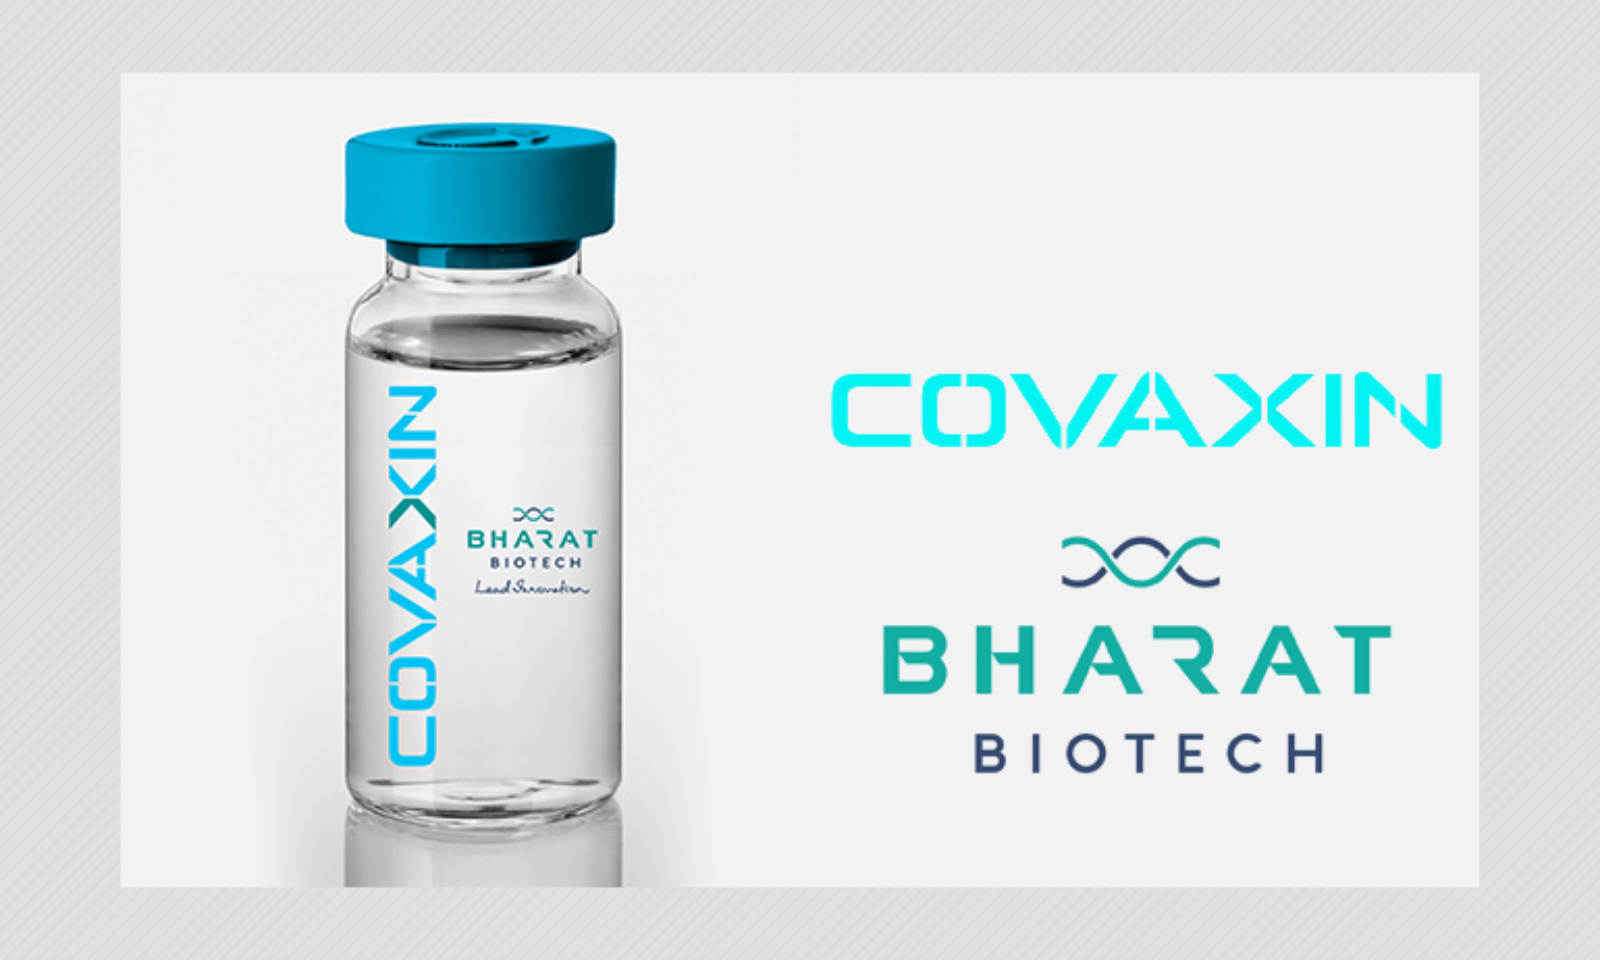 Bharat Biotech's COVID-19 Vaccine Covaxin Begins Phase-III Trials